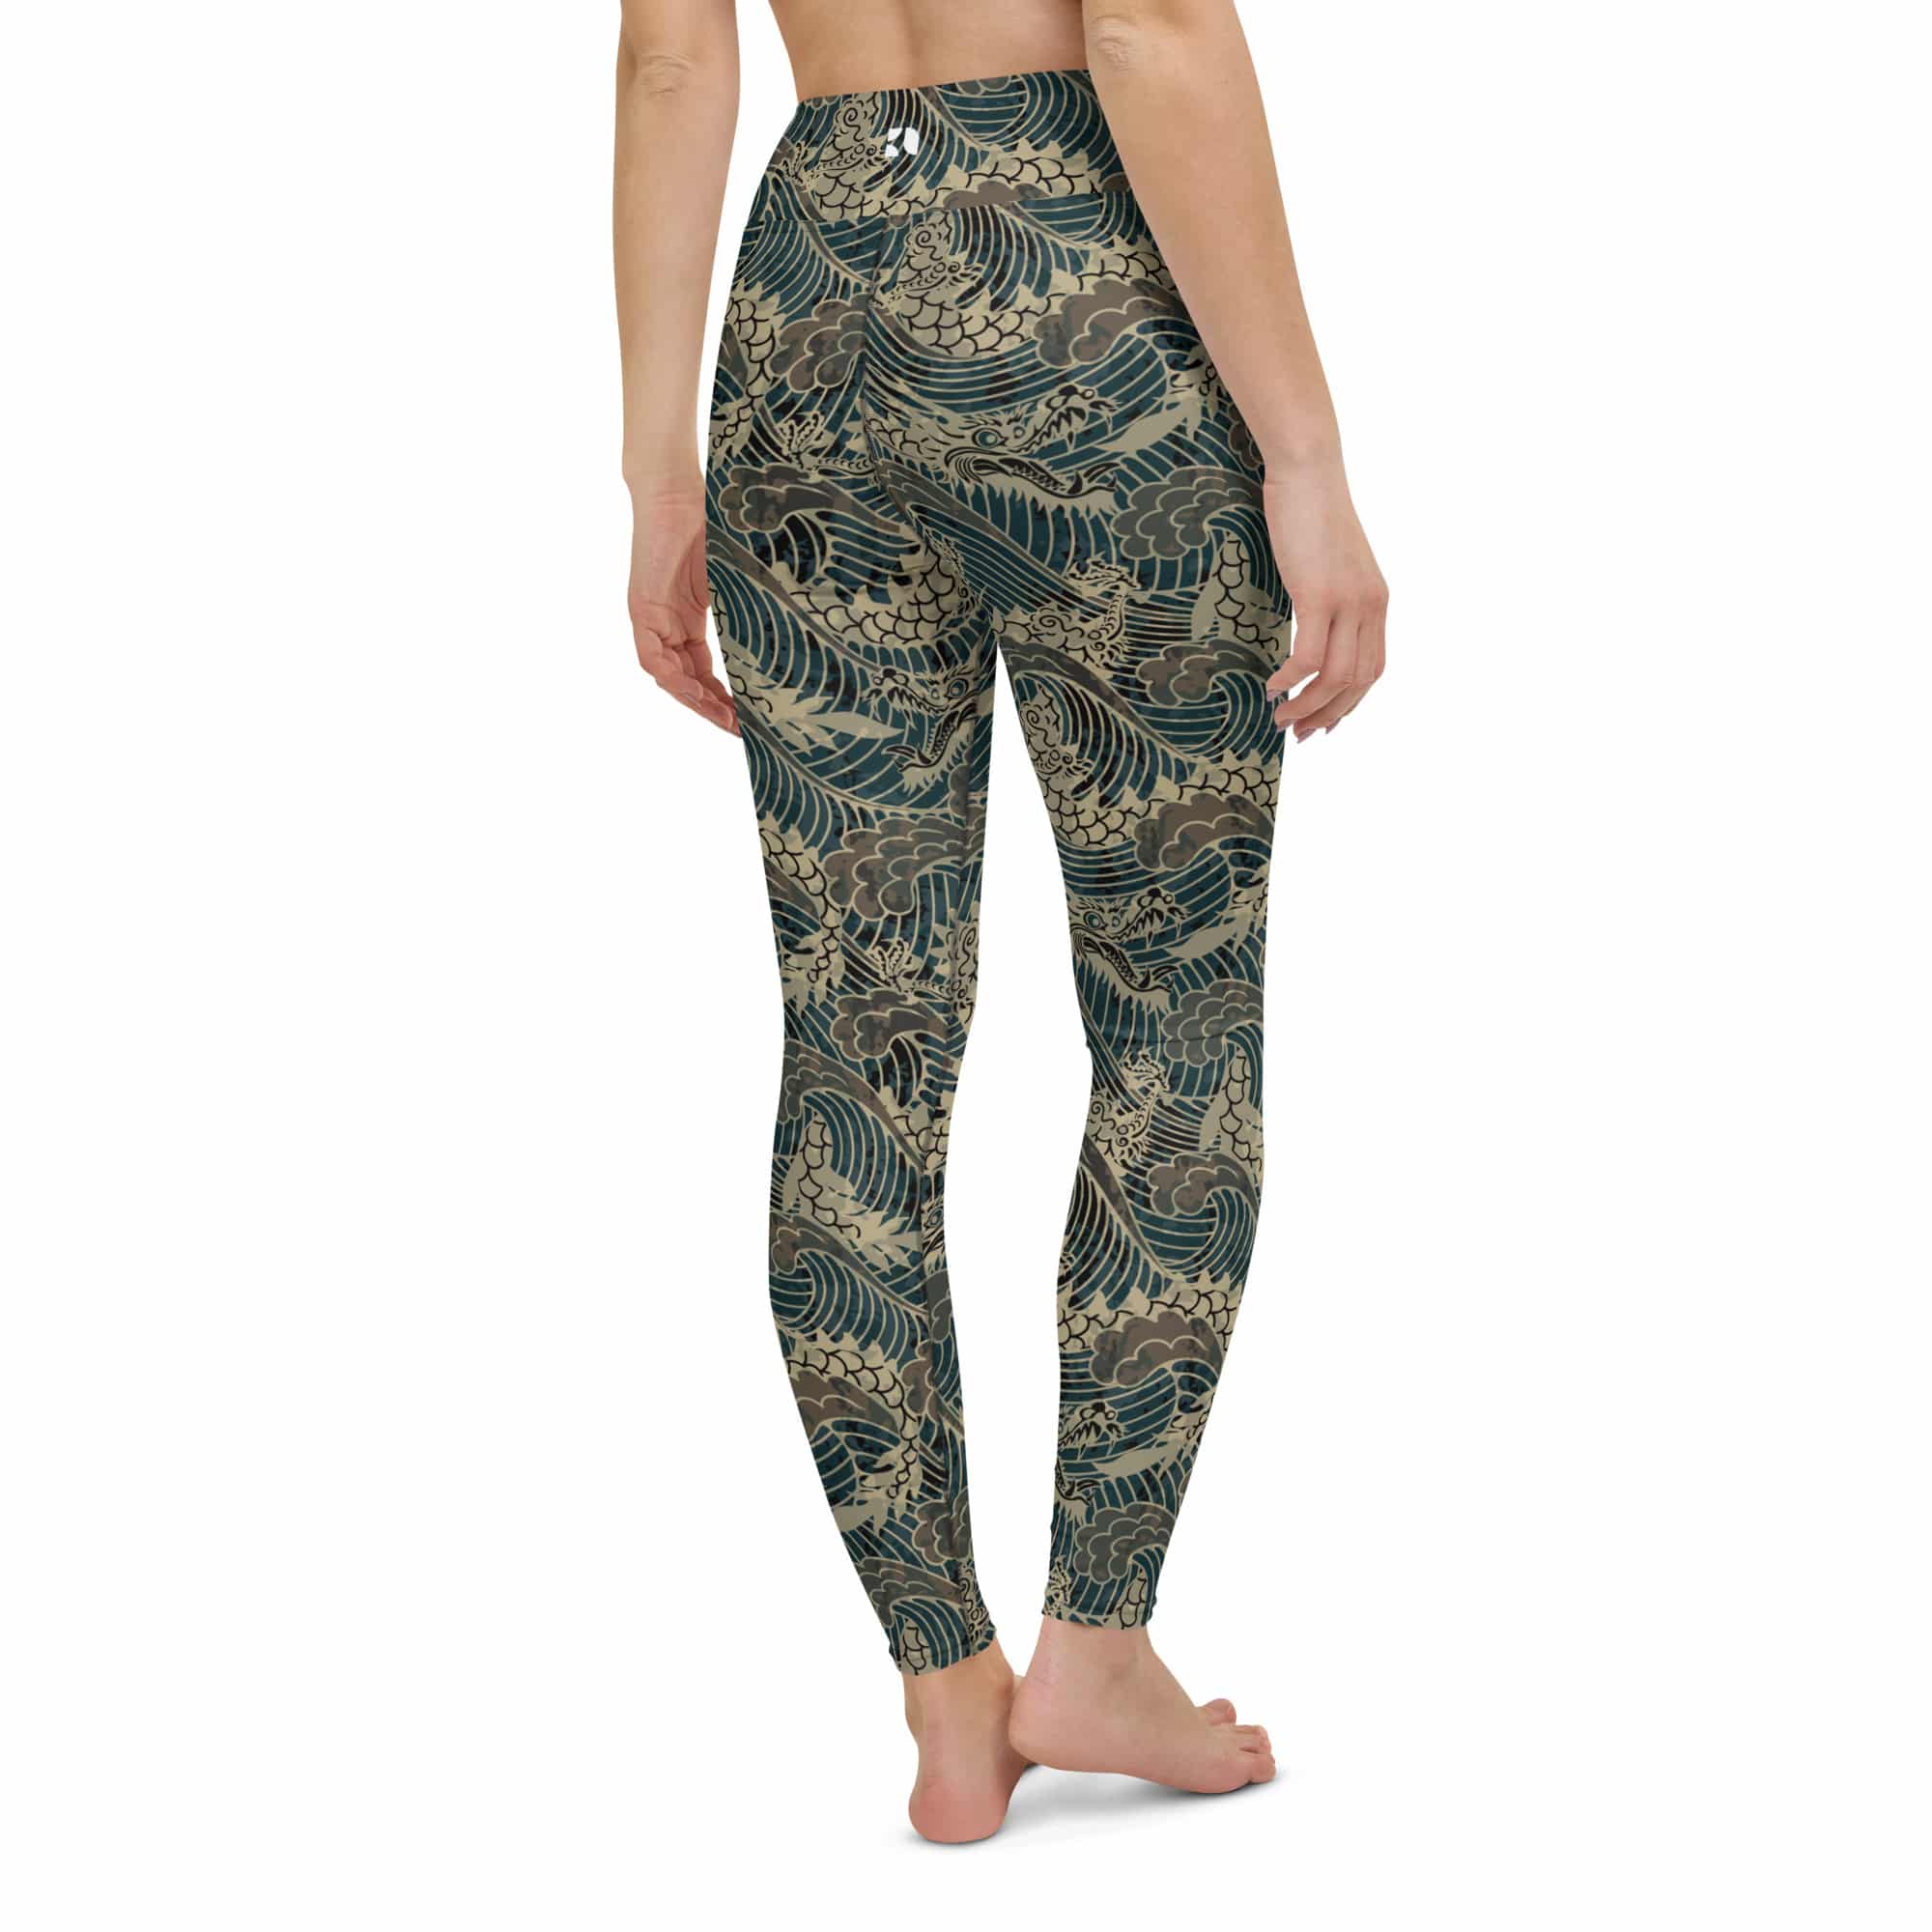 Relax Waisted Legging for Yoga and Fitness - Hirado